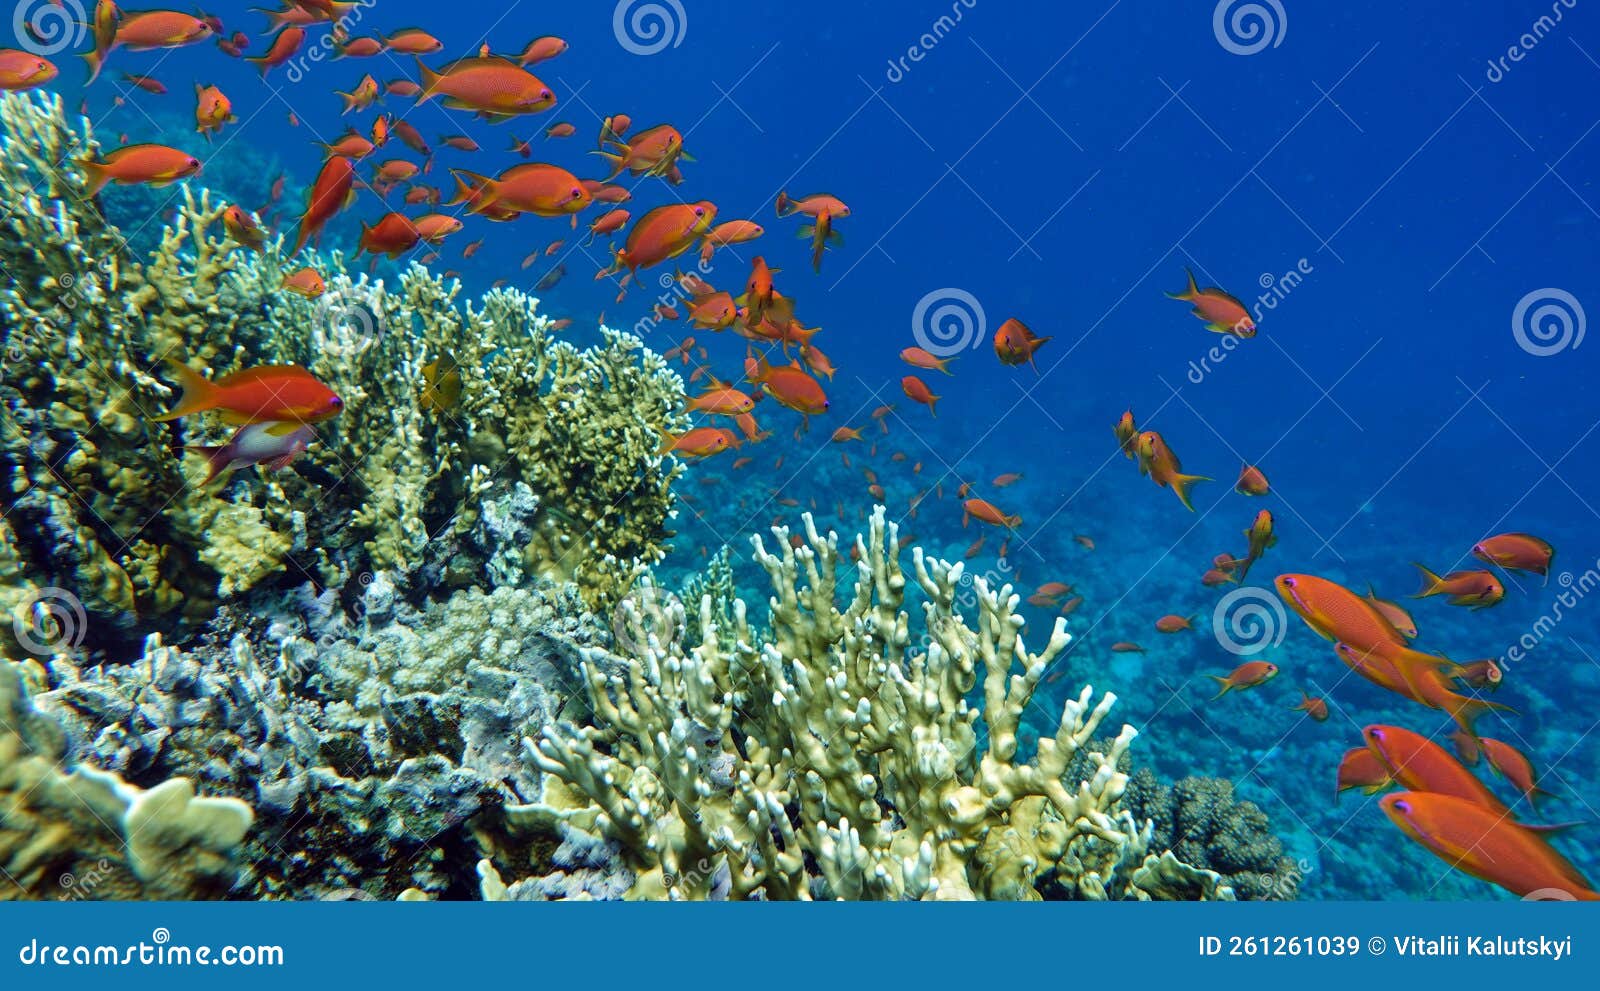 Fish - Sea Goldie. the Most Common Antias in the Red Sea. Divers See ...